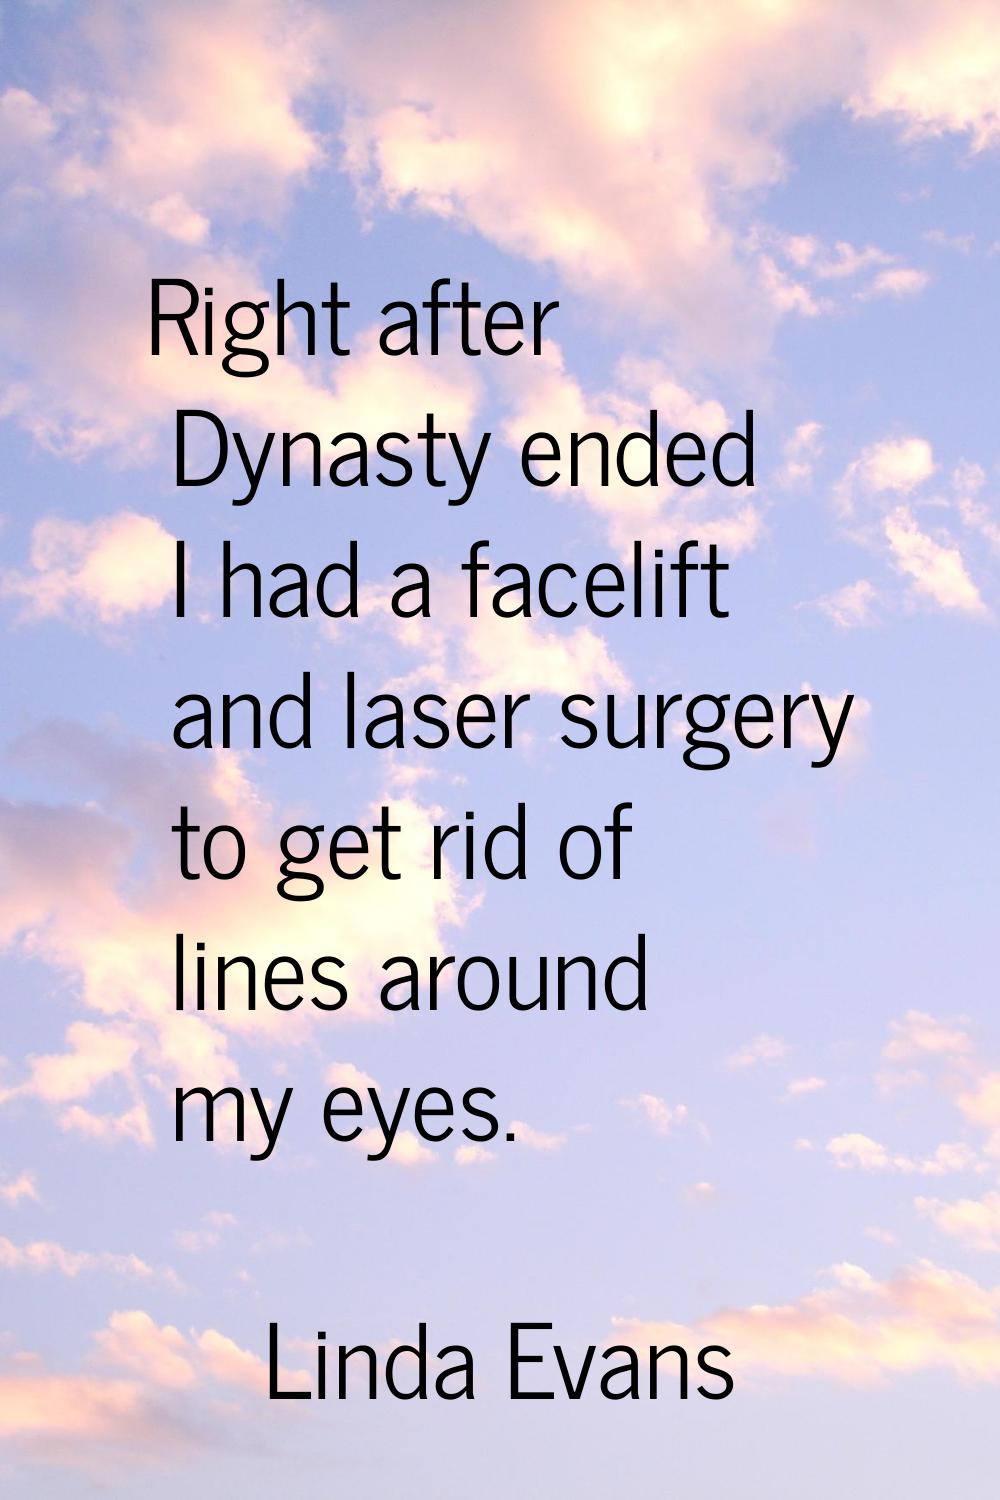 Right after Dynasty ended I had a facelift and laser surgery to get rid of lines around my eyes.